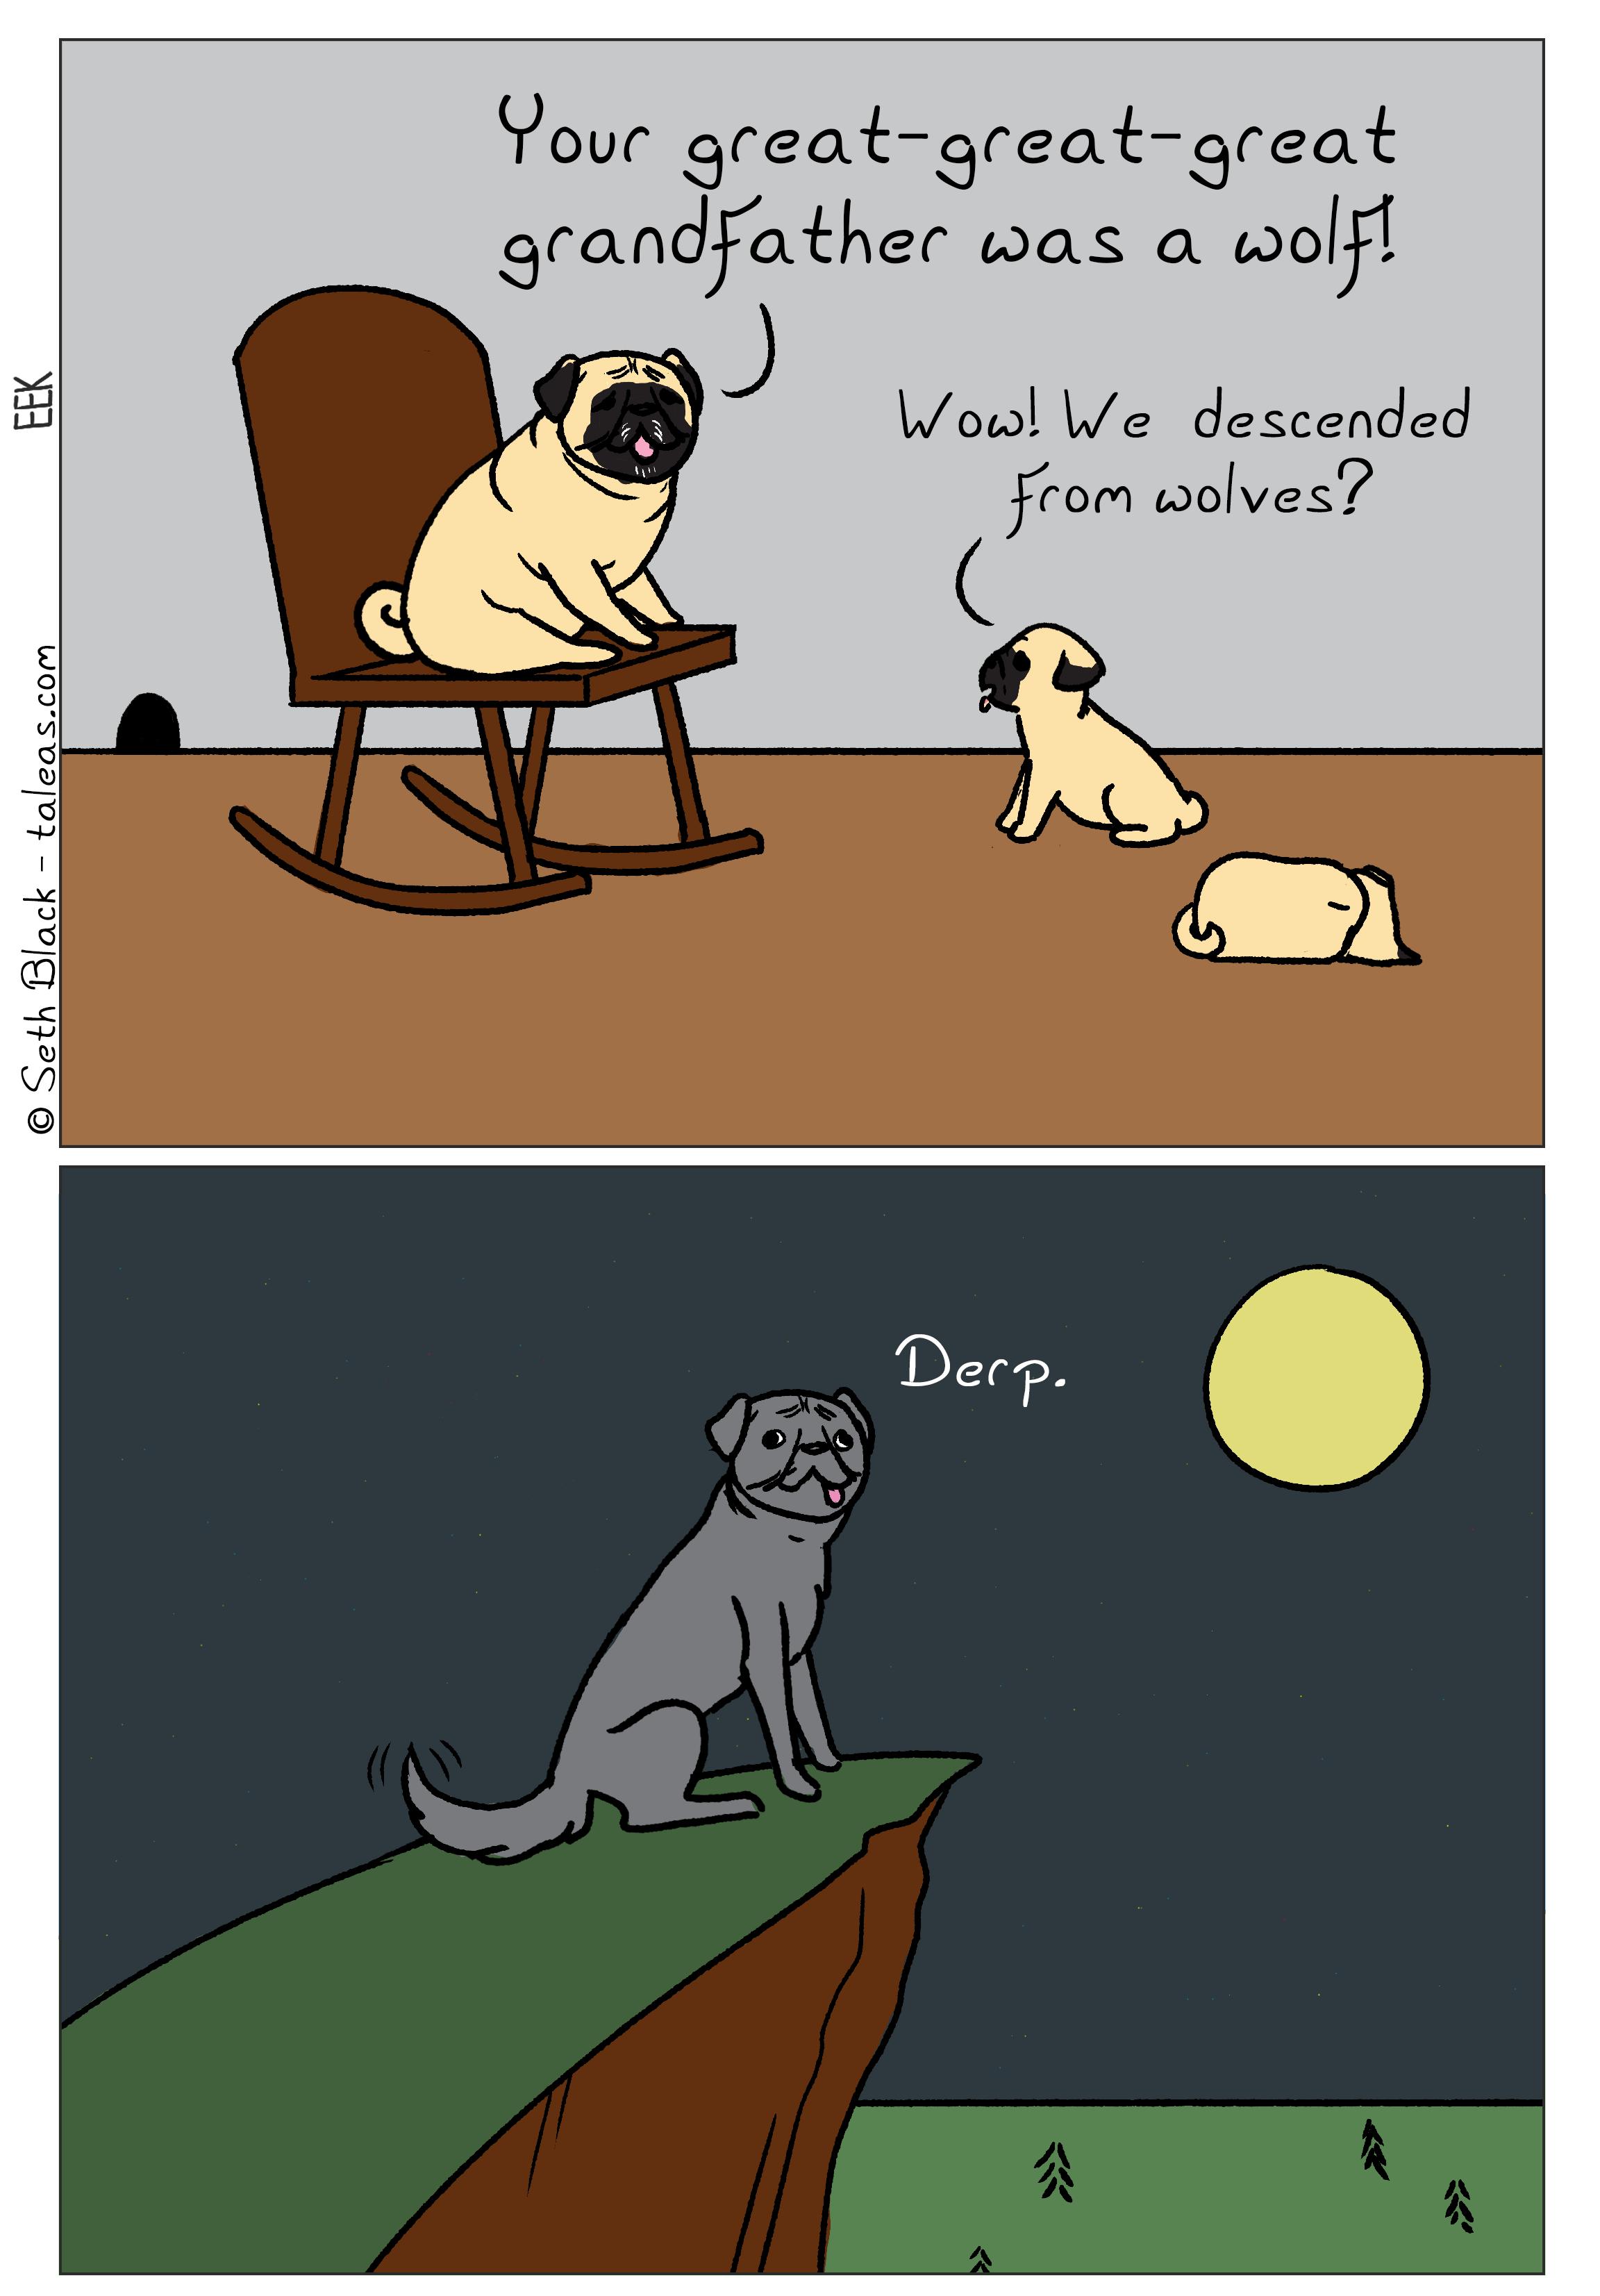 An old pug sits in a rocking chair with two pups at his feet. One pup is asleep. The old pug says, "Your great-great-great grandfather was a wolf!". The other pup exclaims, "Wow! We descended from wolves?" In a second panel, a dog stands majestically on a cliff looking over his domain while the moon hangs overhead - the dog has a wolf's body, a pug's face, and wags its tail furiously. The dog is labeled, "Derp."